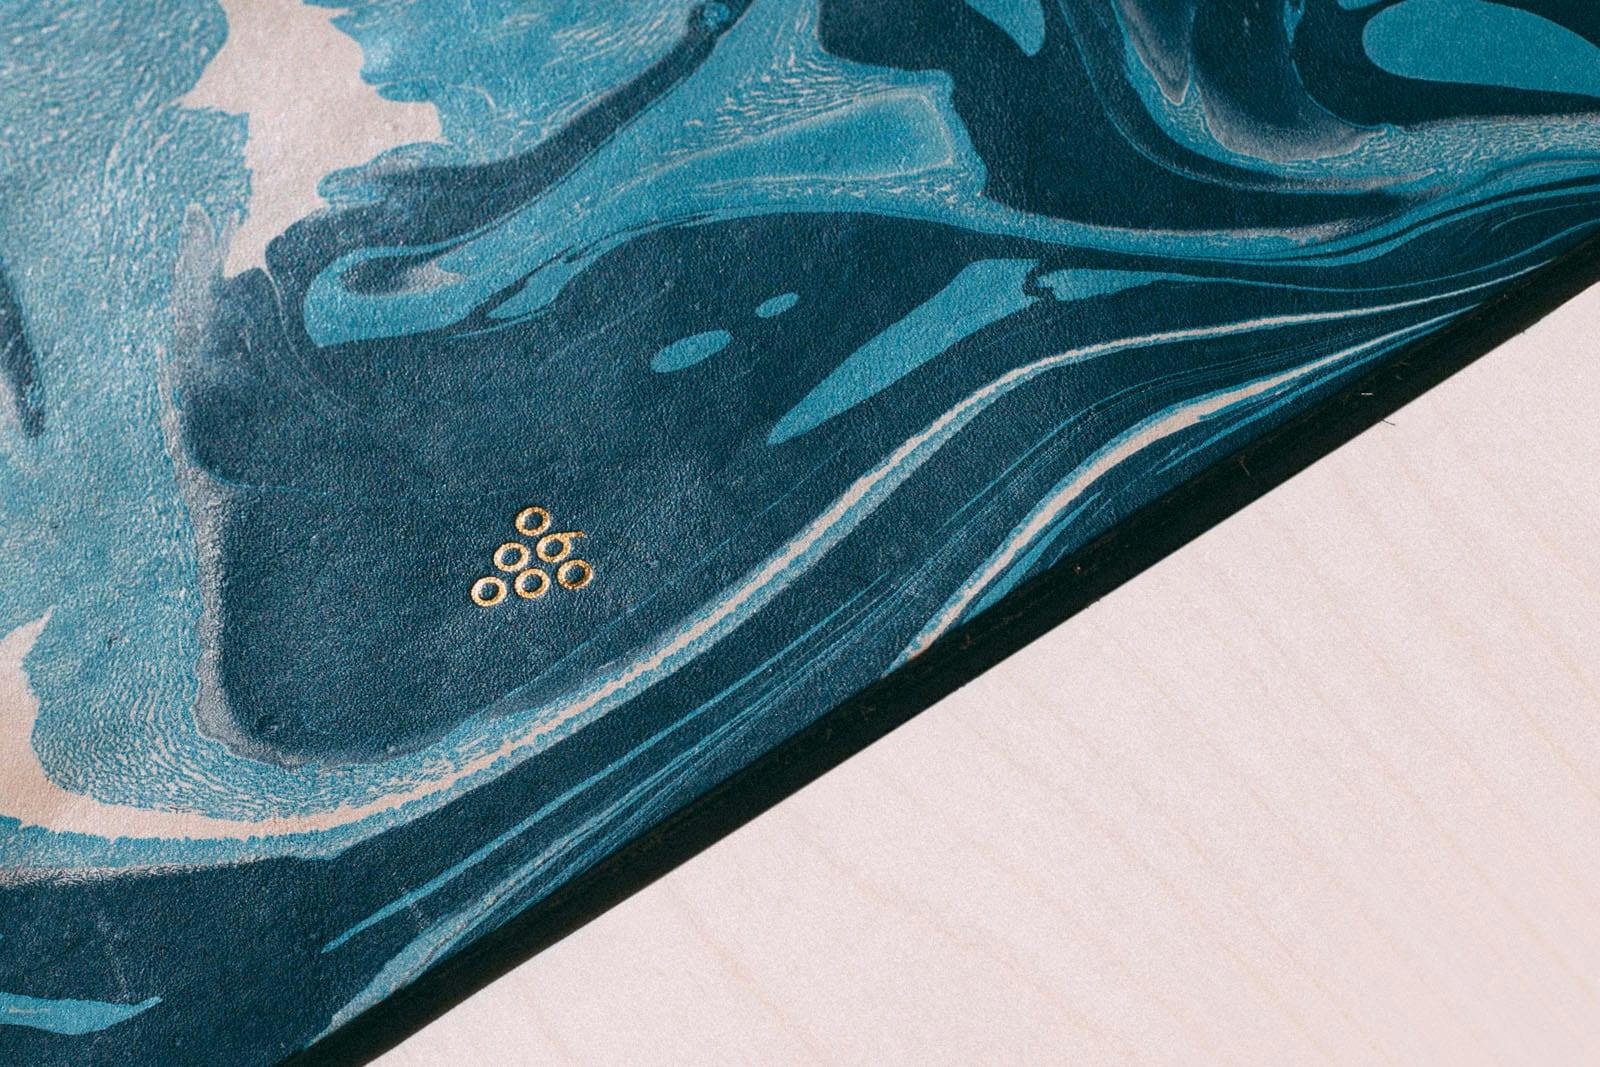 A close up of the Sixty Vines logo in gold on a blue marble background